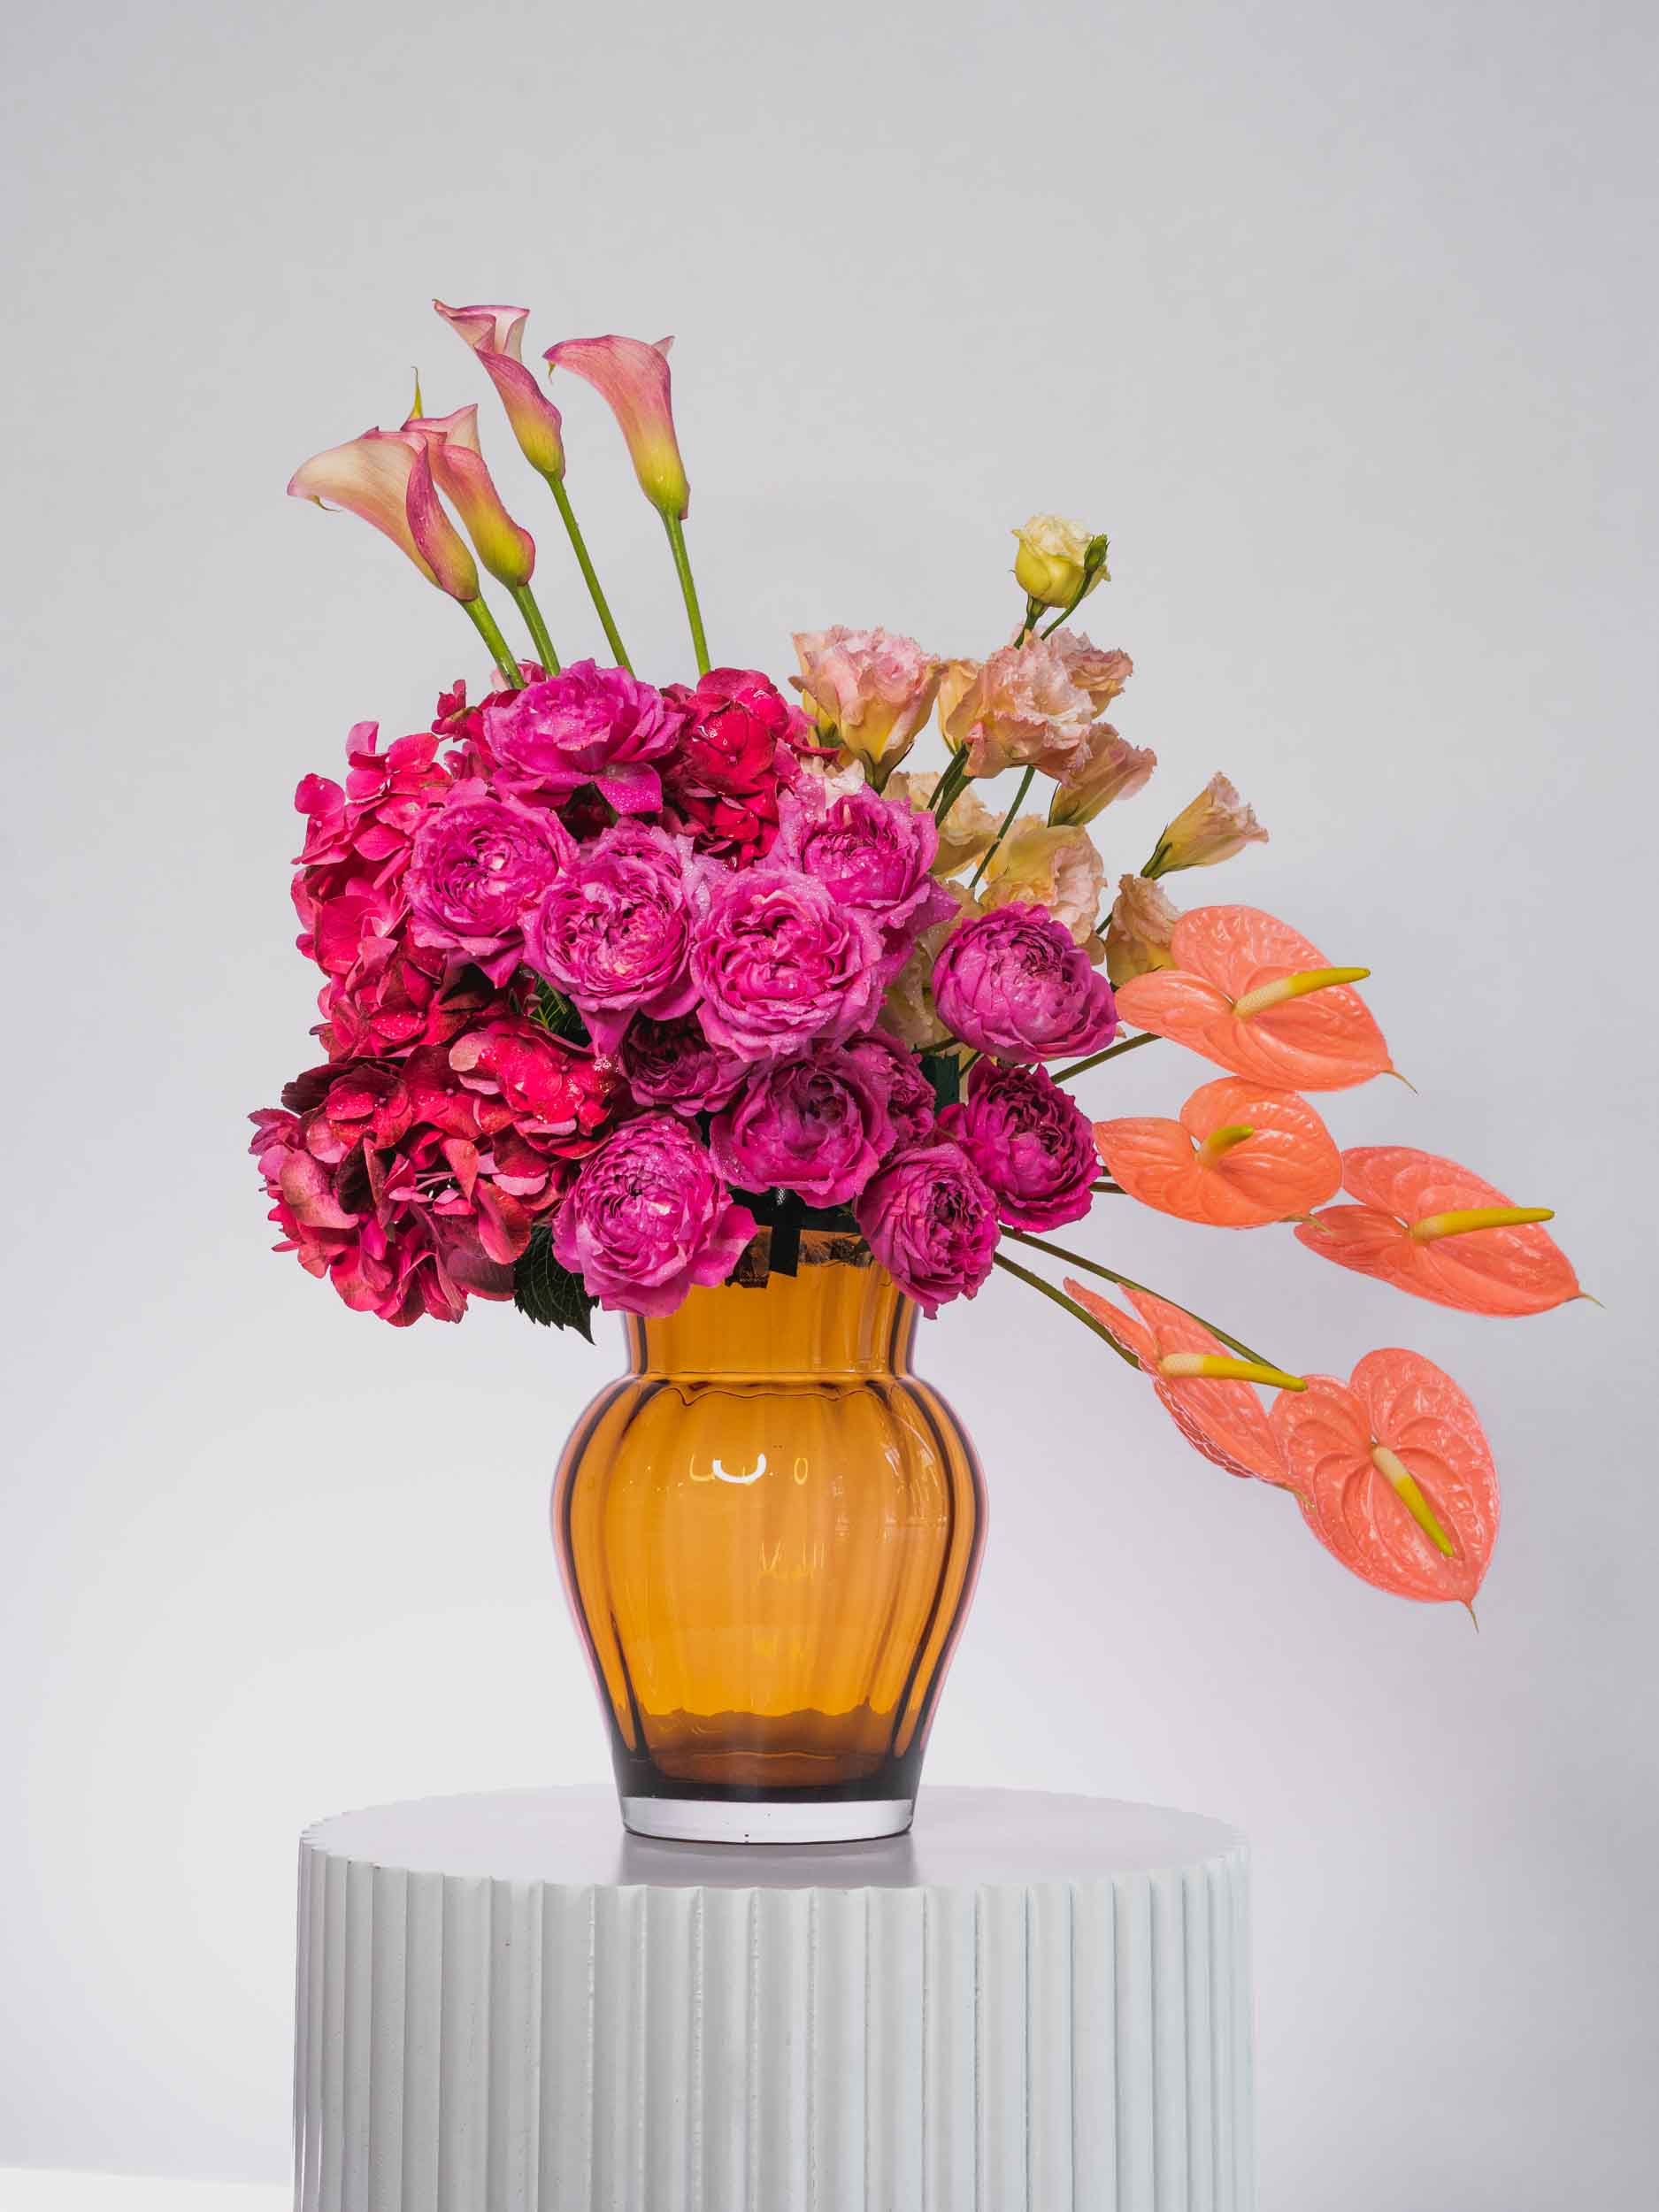 Elegance Unveiled Flowers arranged in a glass vase